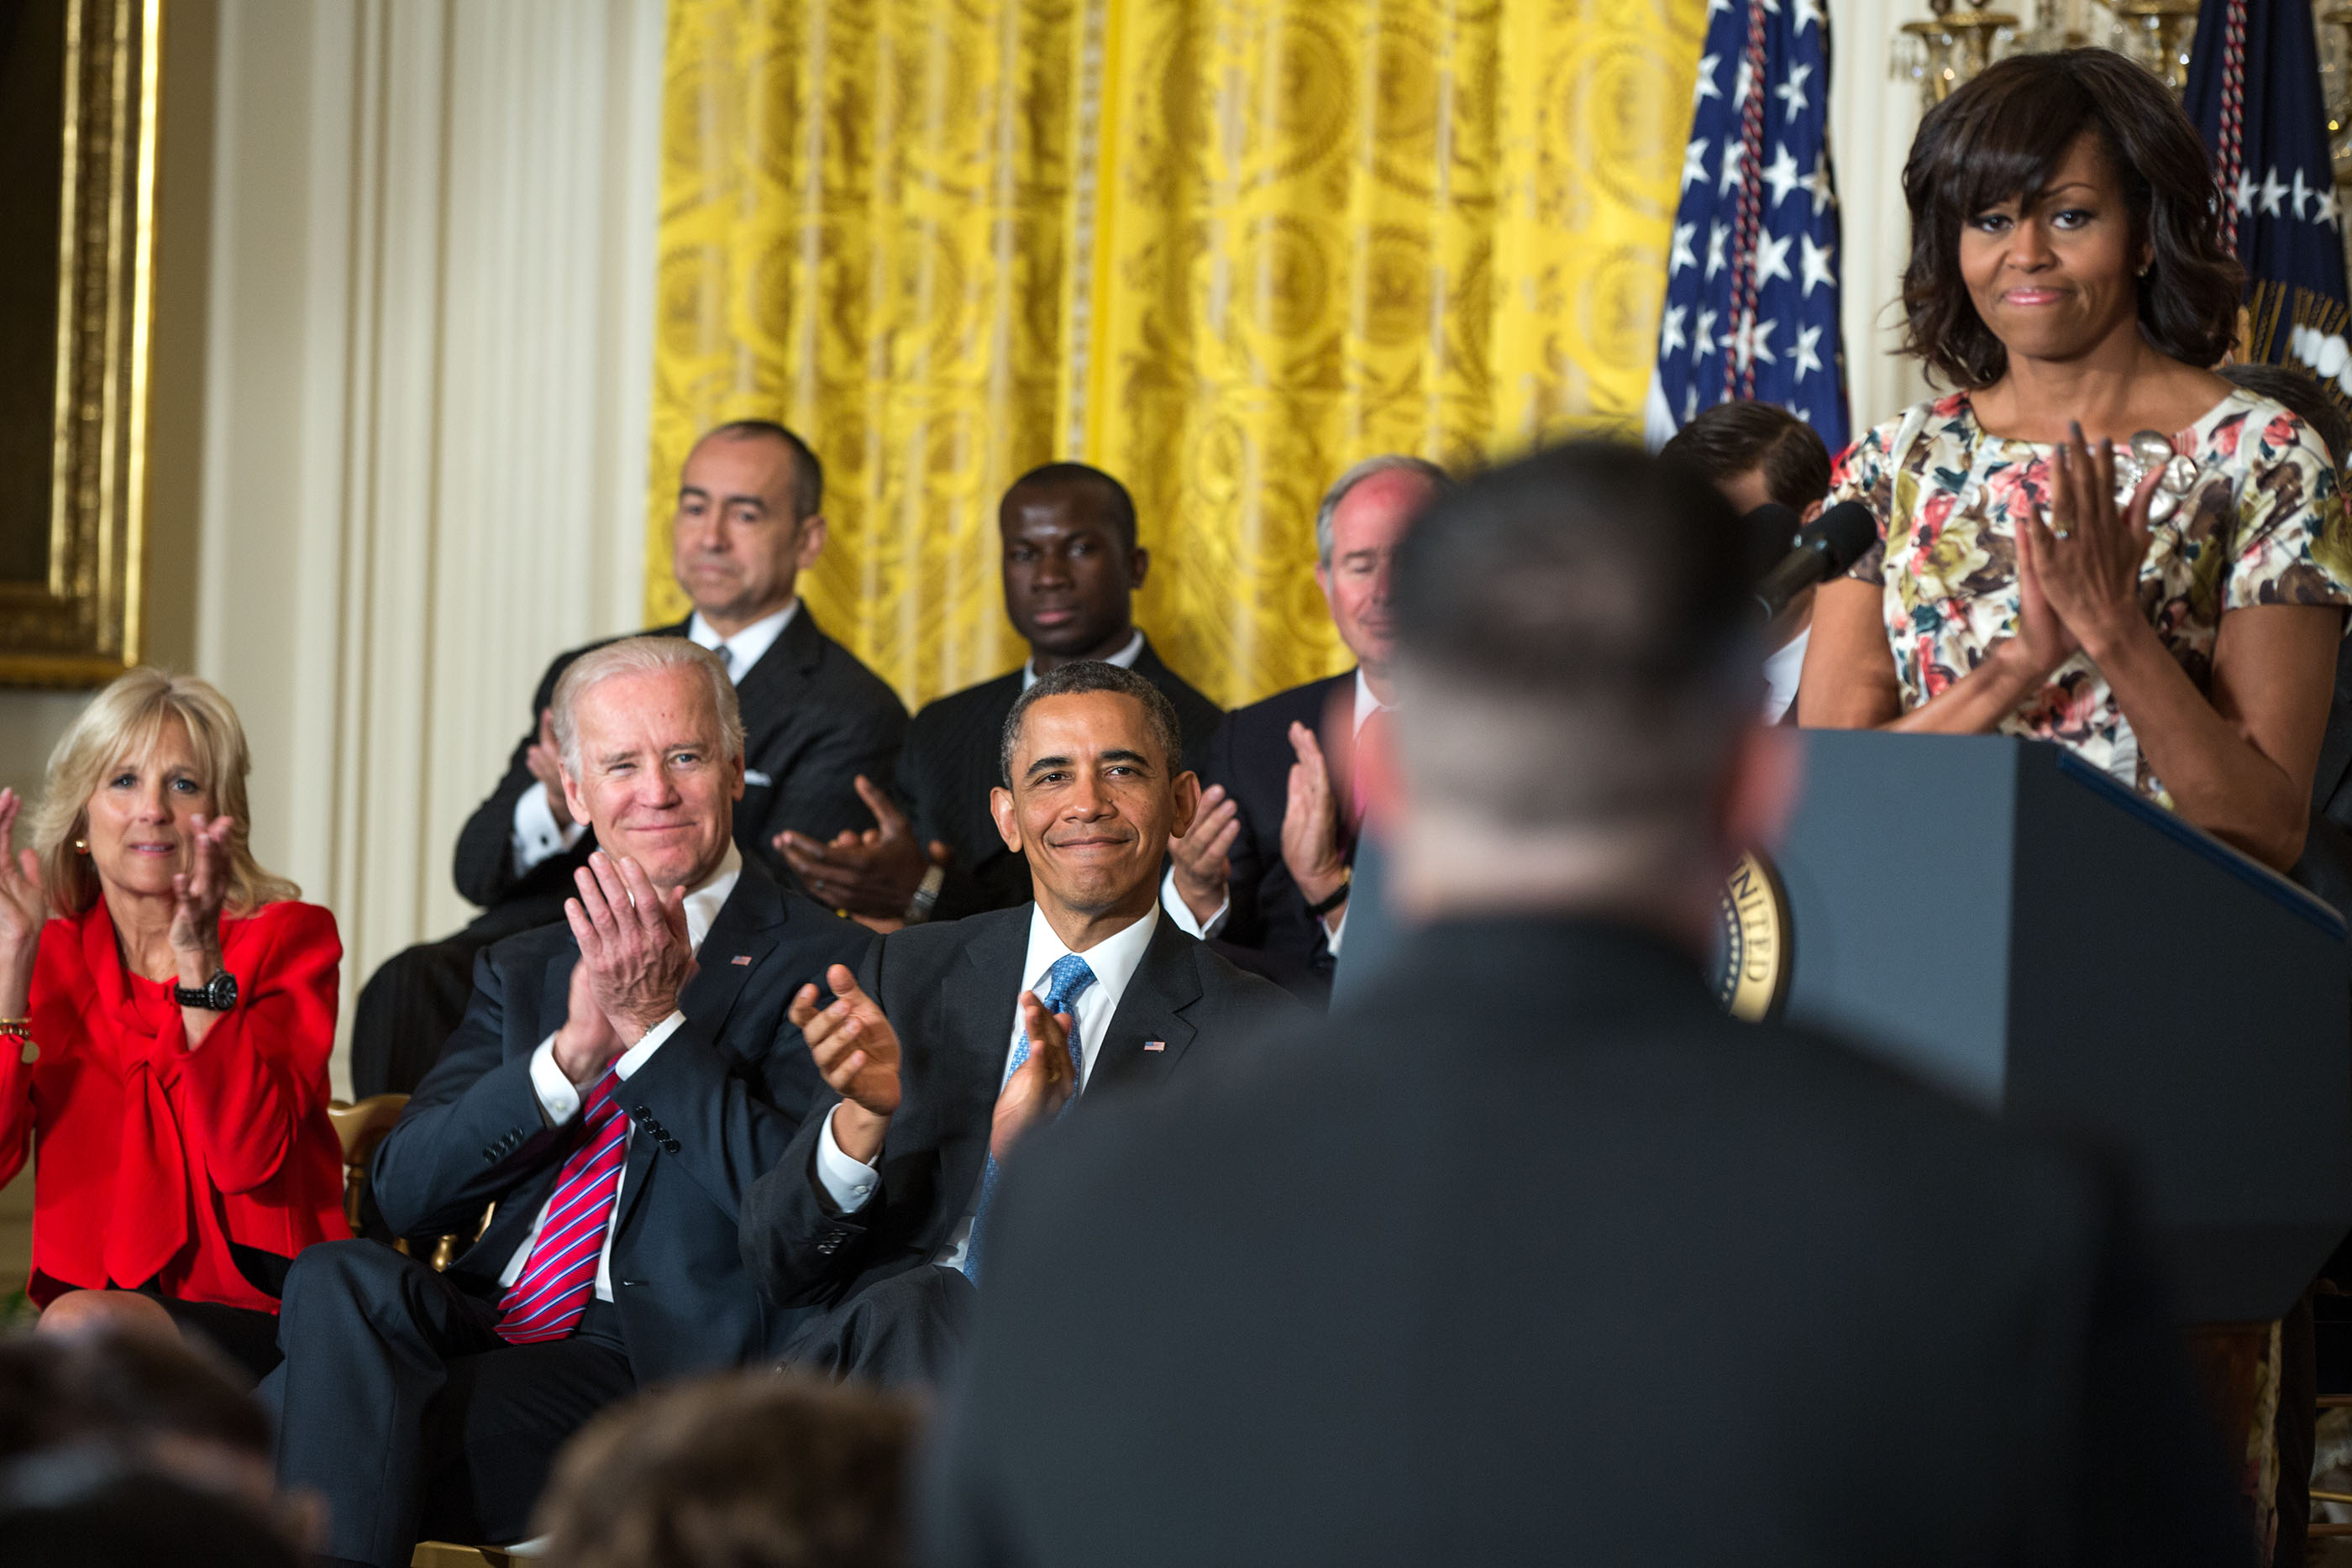 The First Lady delivers remarks during an employment announcement for veterans and military spouses, in the East Room of the White House, April 30, 2013. (Official White House Photo by Pete Souza)